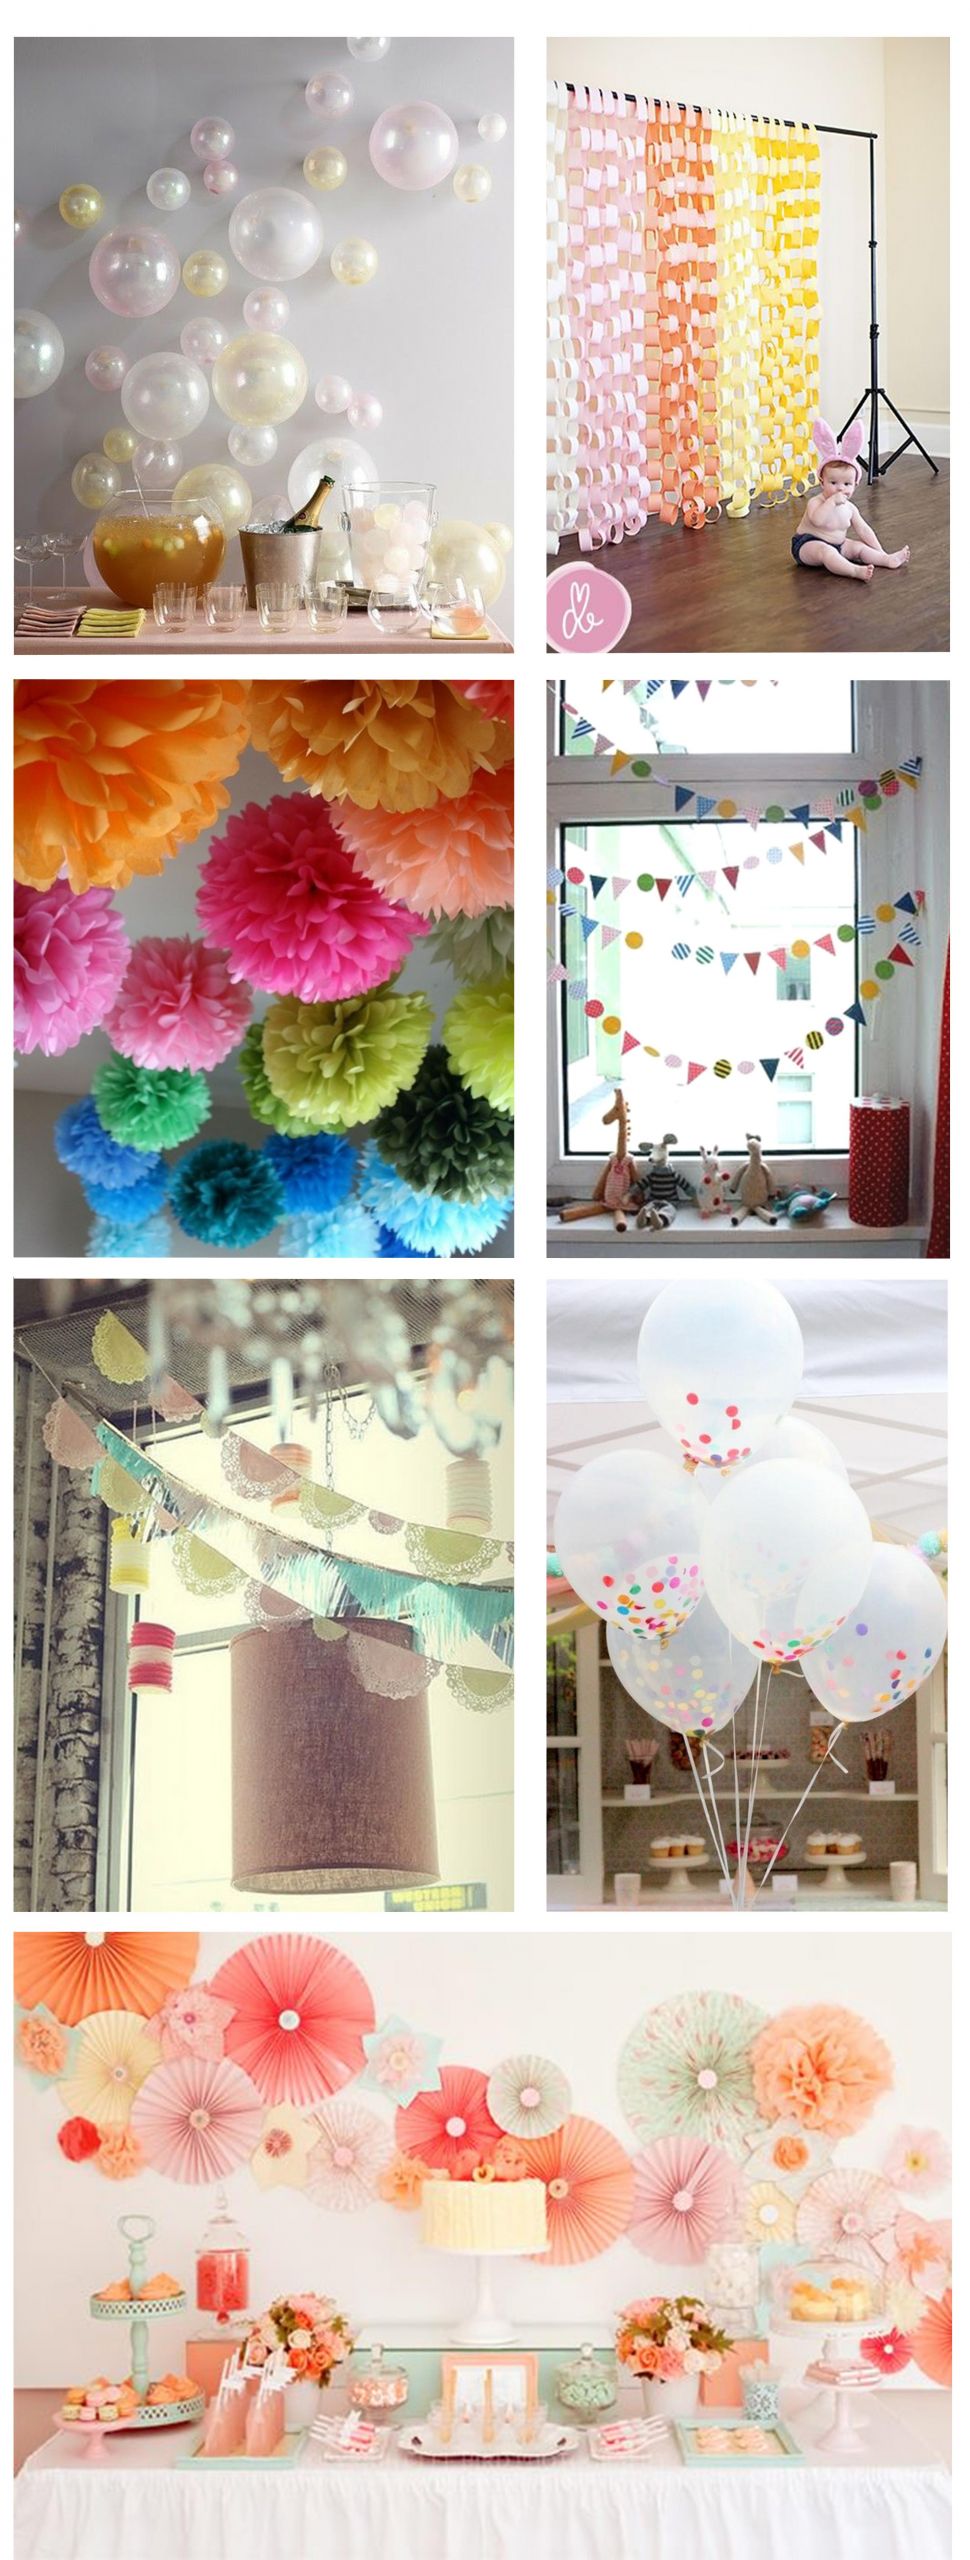 DIY Bday Party Decorations
 Ideas for home made party decorations